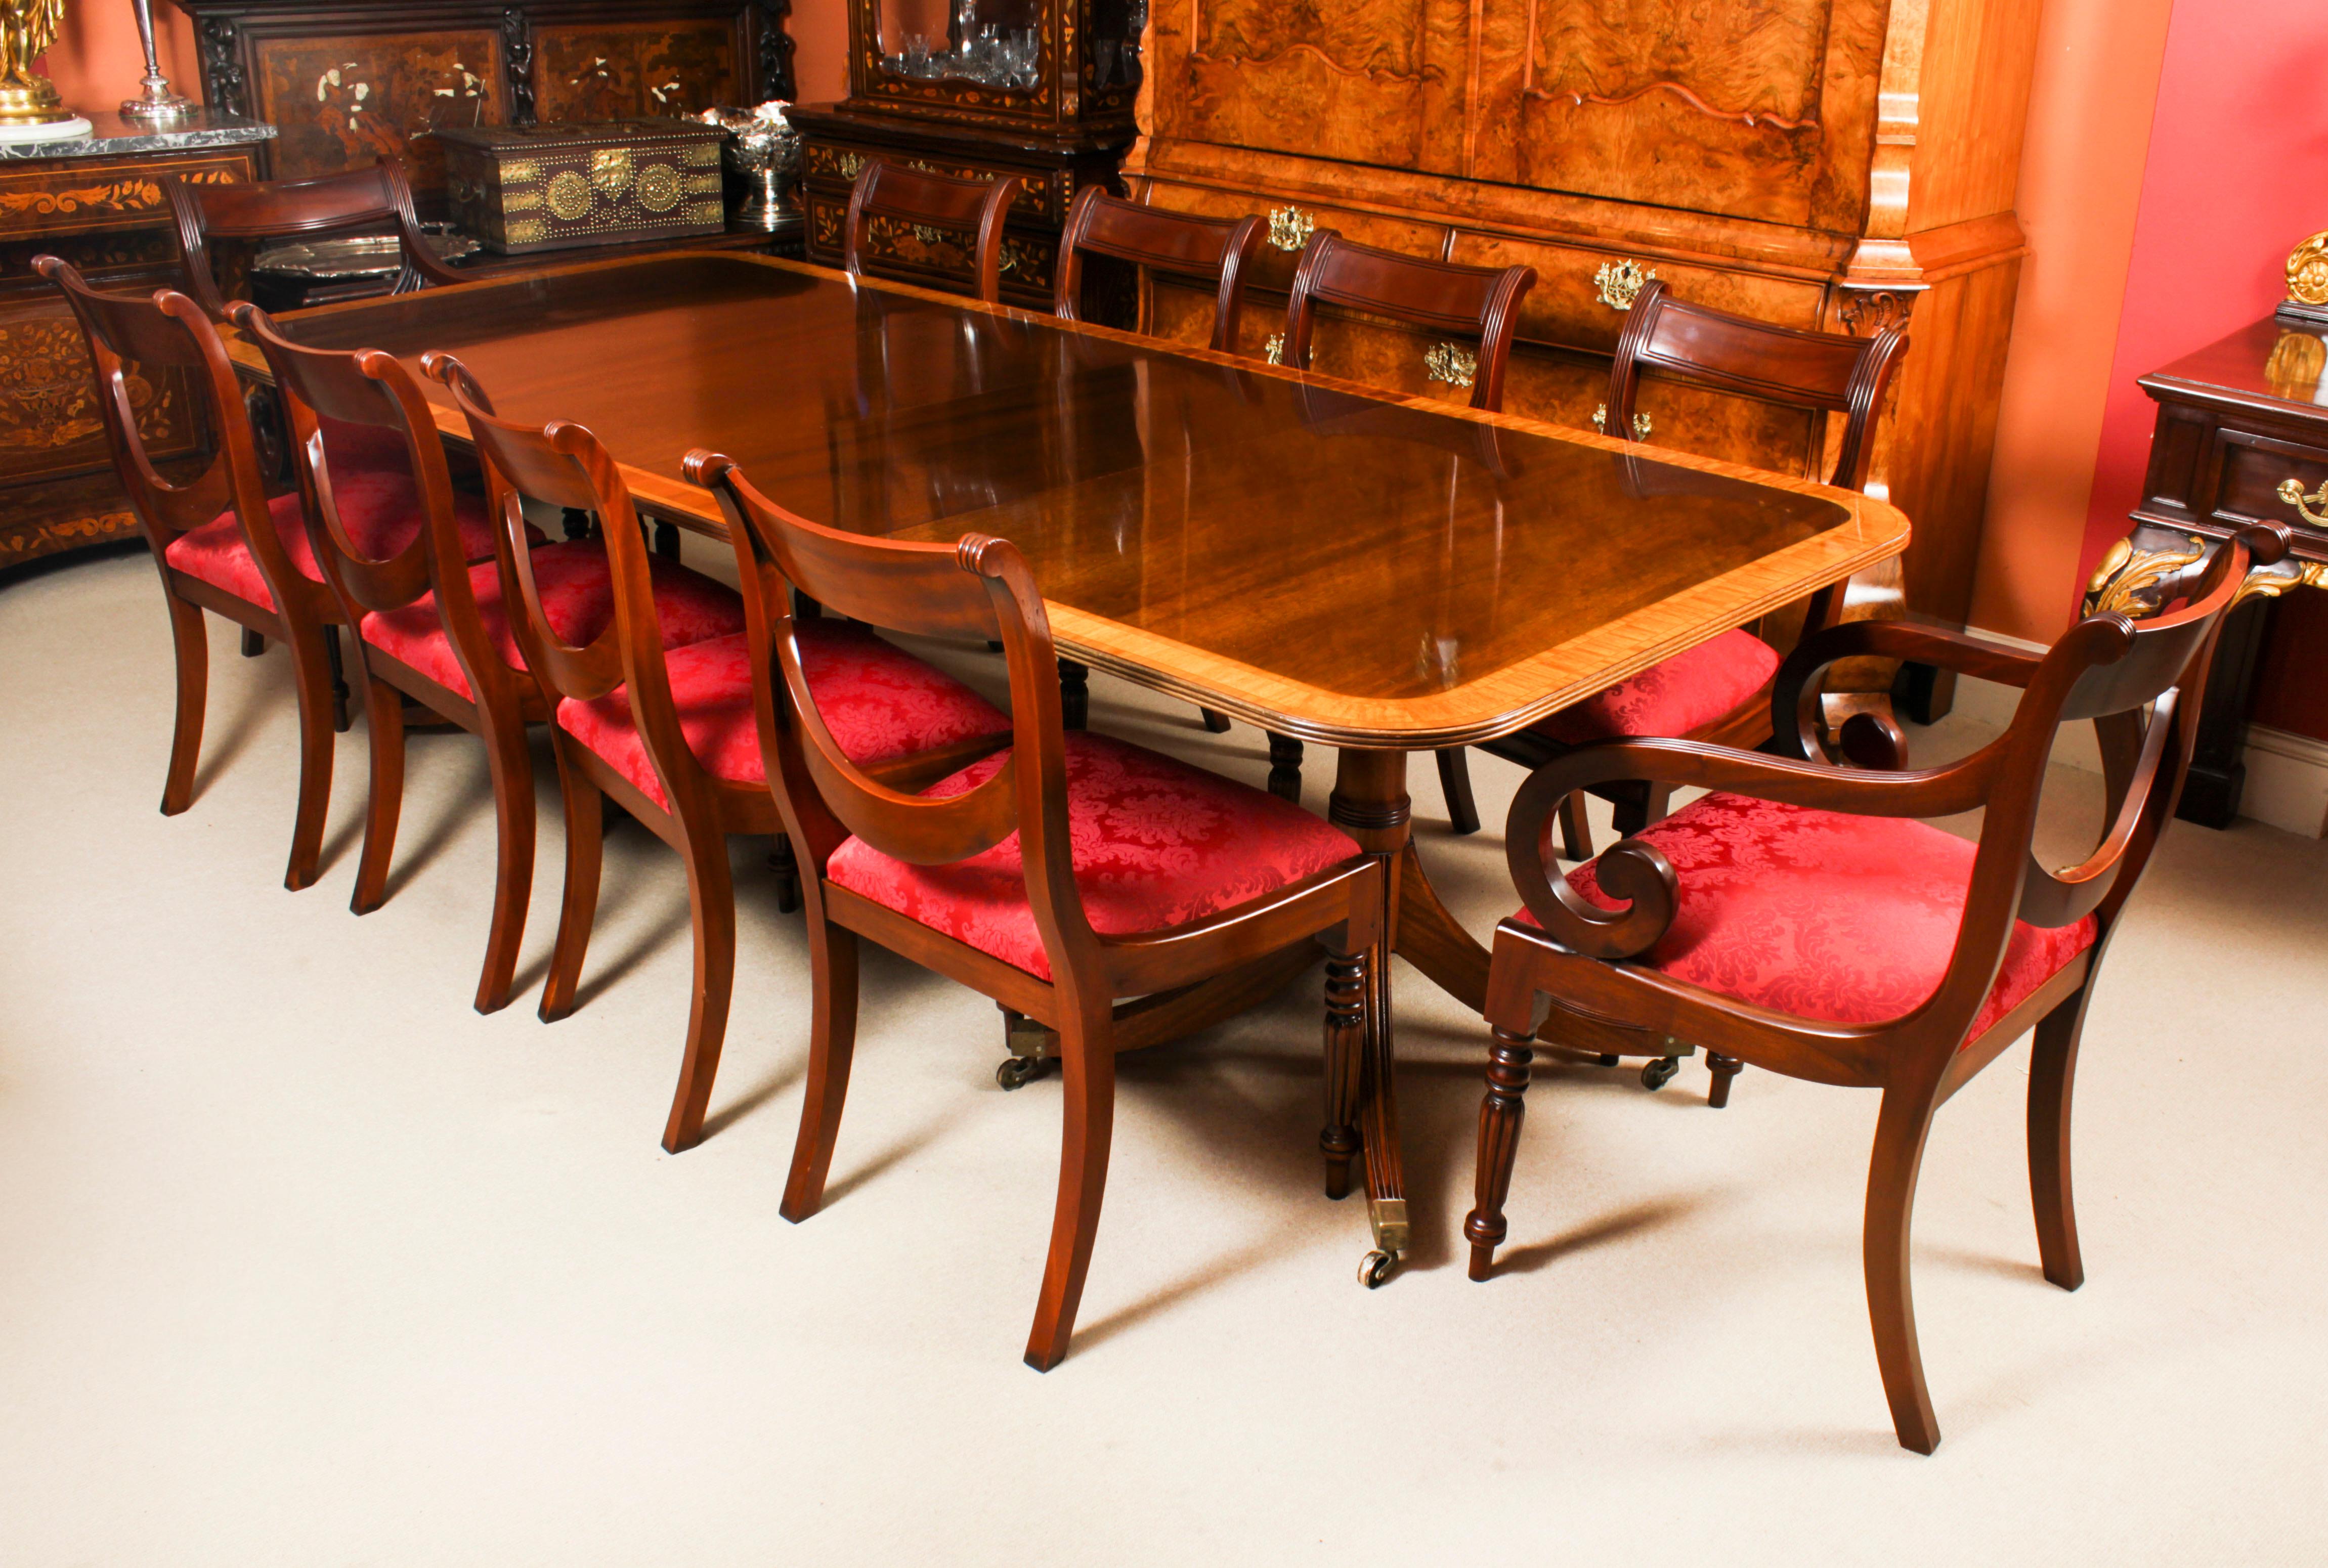 This is fabulous Vintage Regency Revival dining table by the master cabinet maker William Tillman, Circa 1980 in date.

The table is made of stunning solid flame mahogany with satinwood crossbanding and is raised on twin 